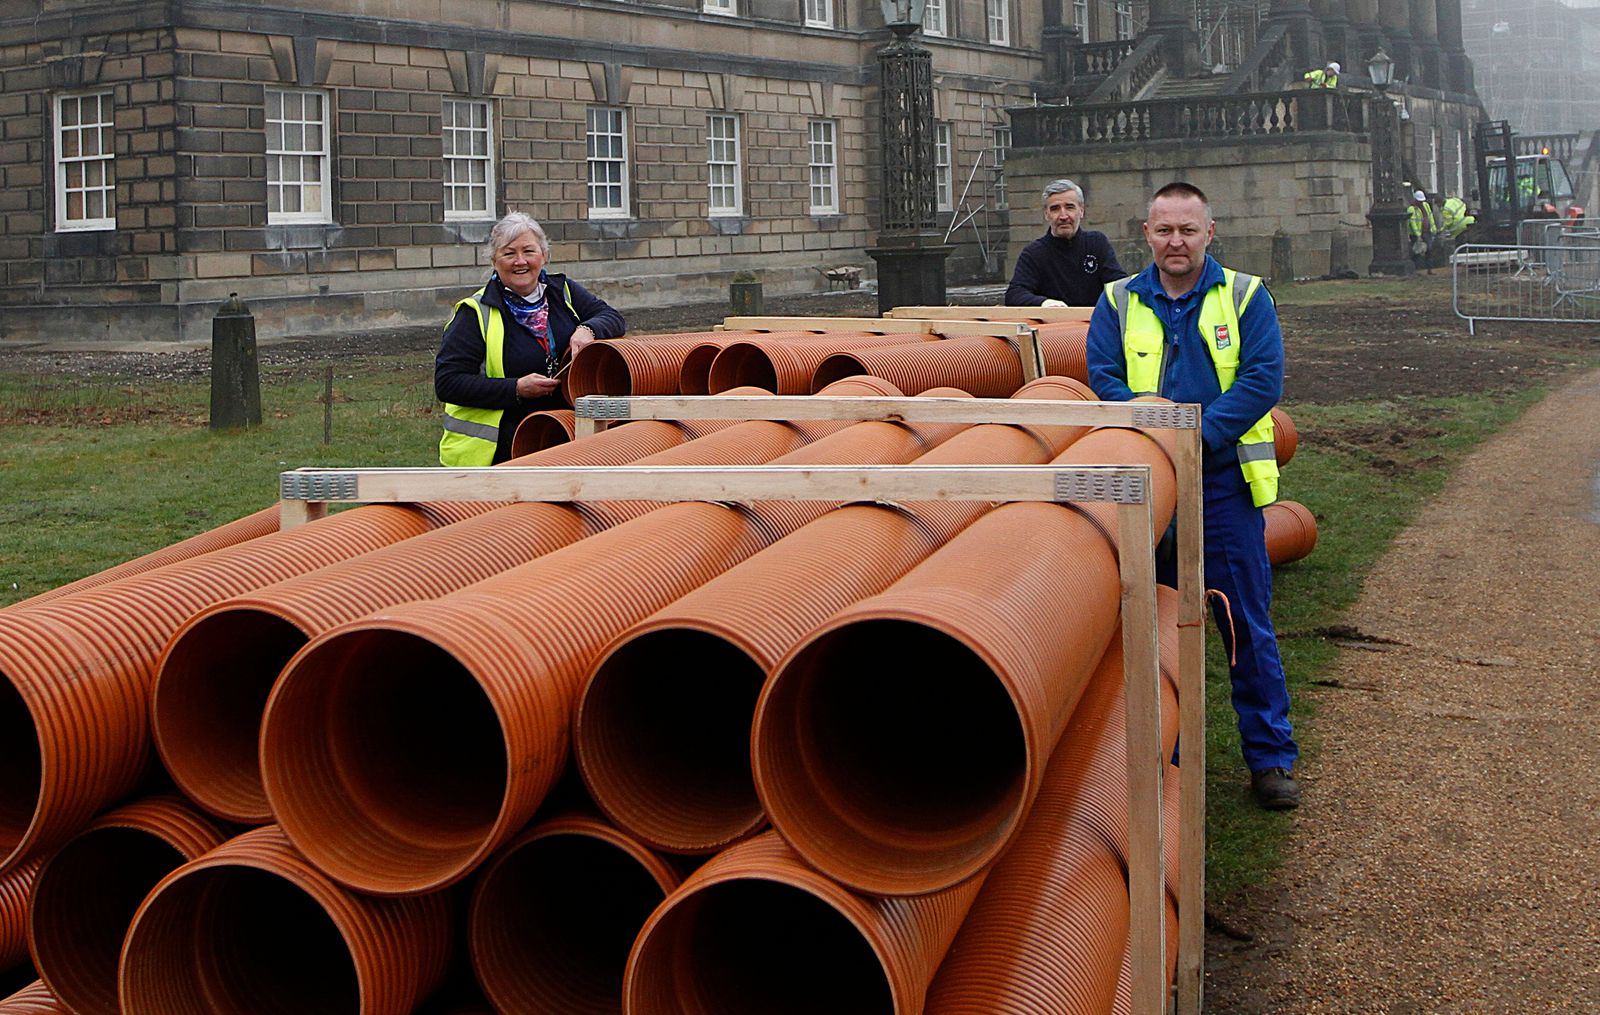 Polypipe help Wentworth Woodhouse lay plans for a greener future